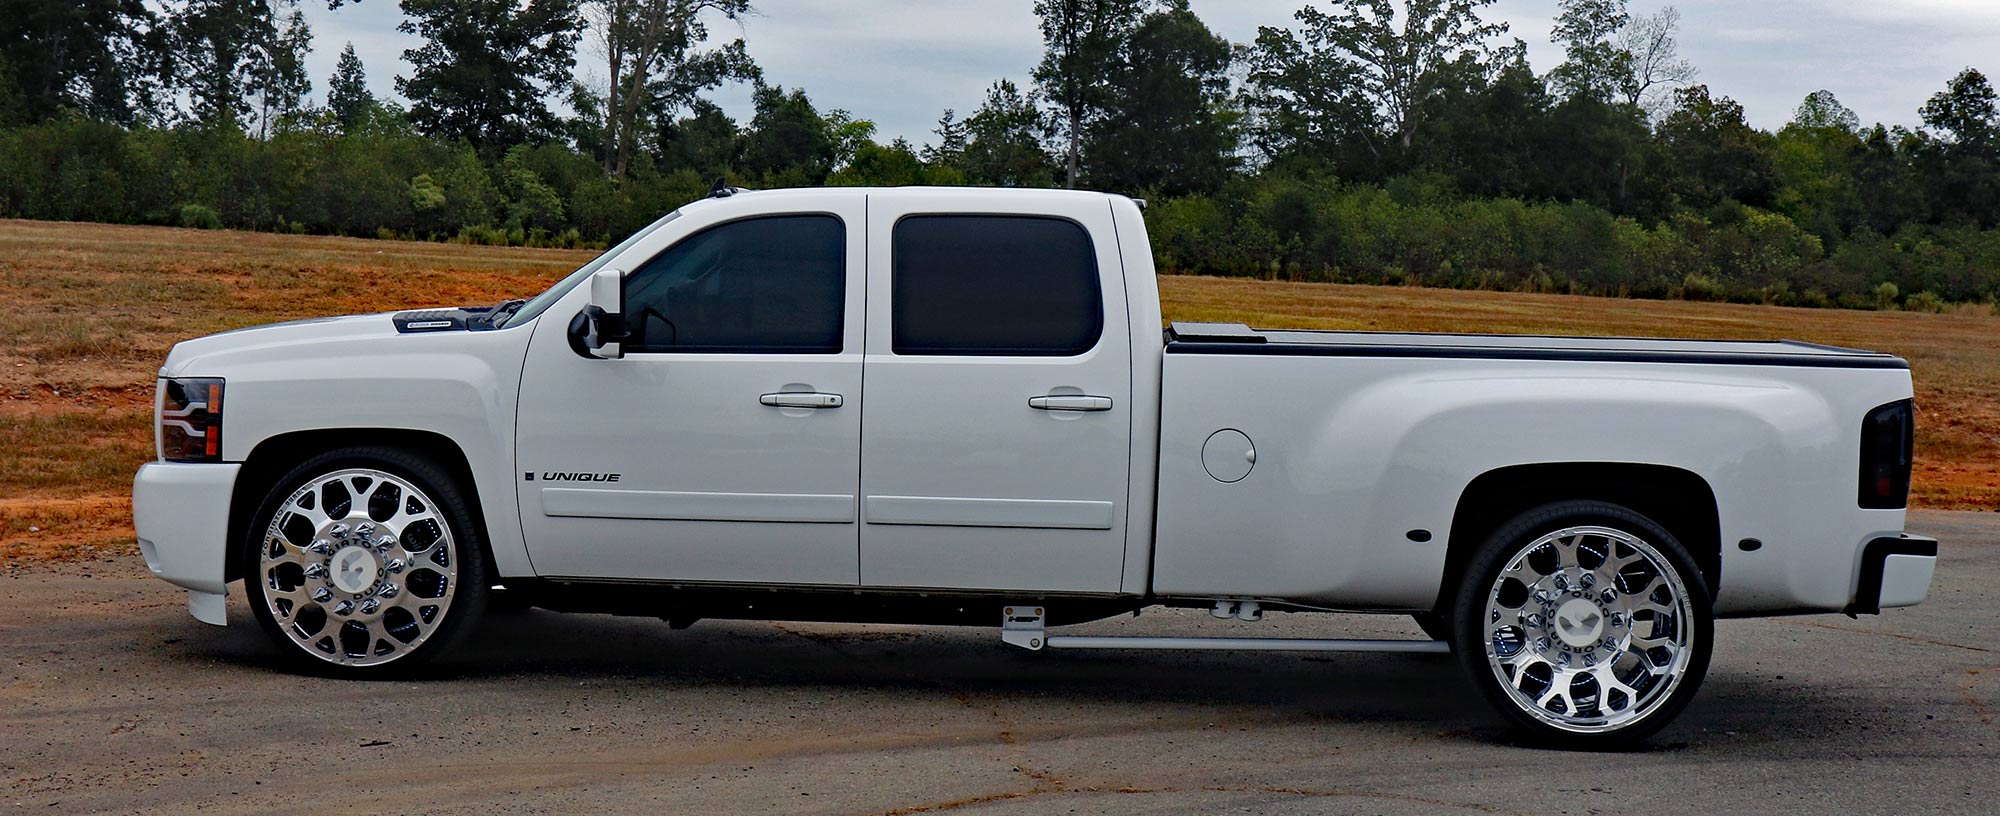 2008 Chevy 3500 HD side profile